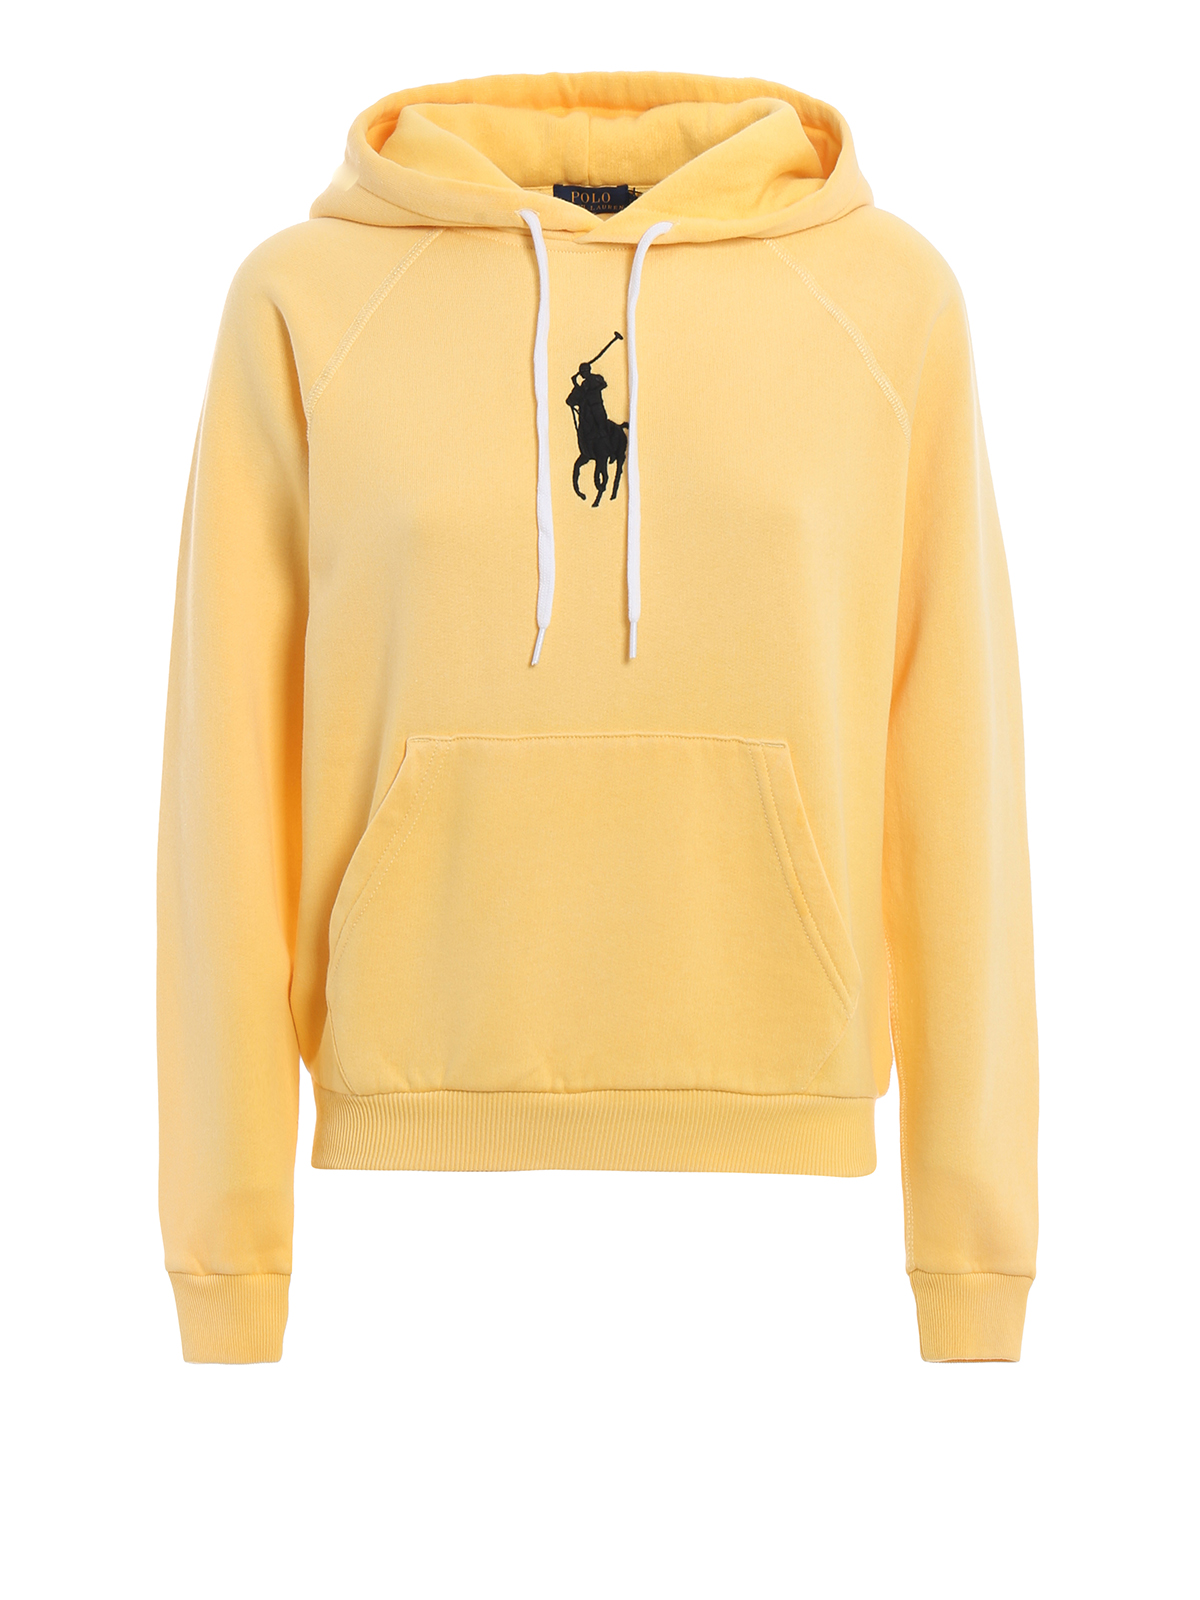 Polo Ralph Lauren Embroidered Logo Yellow Cotton Blend Hoodie 